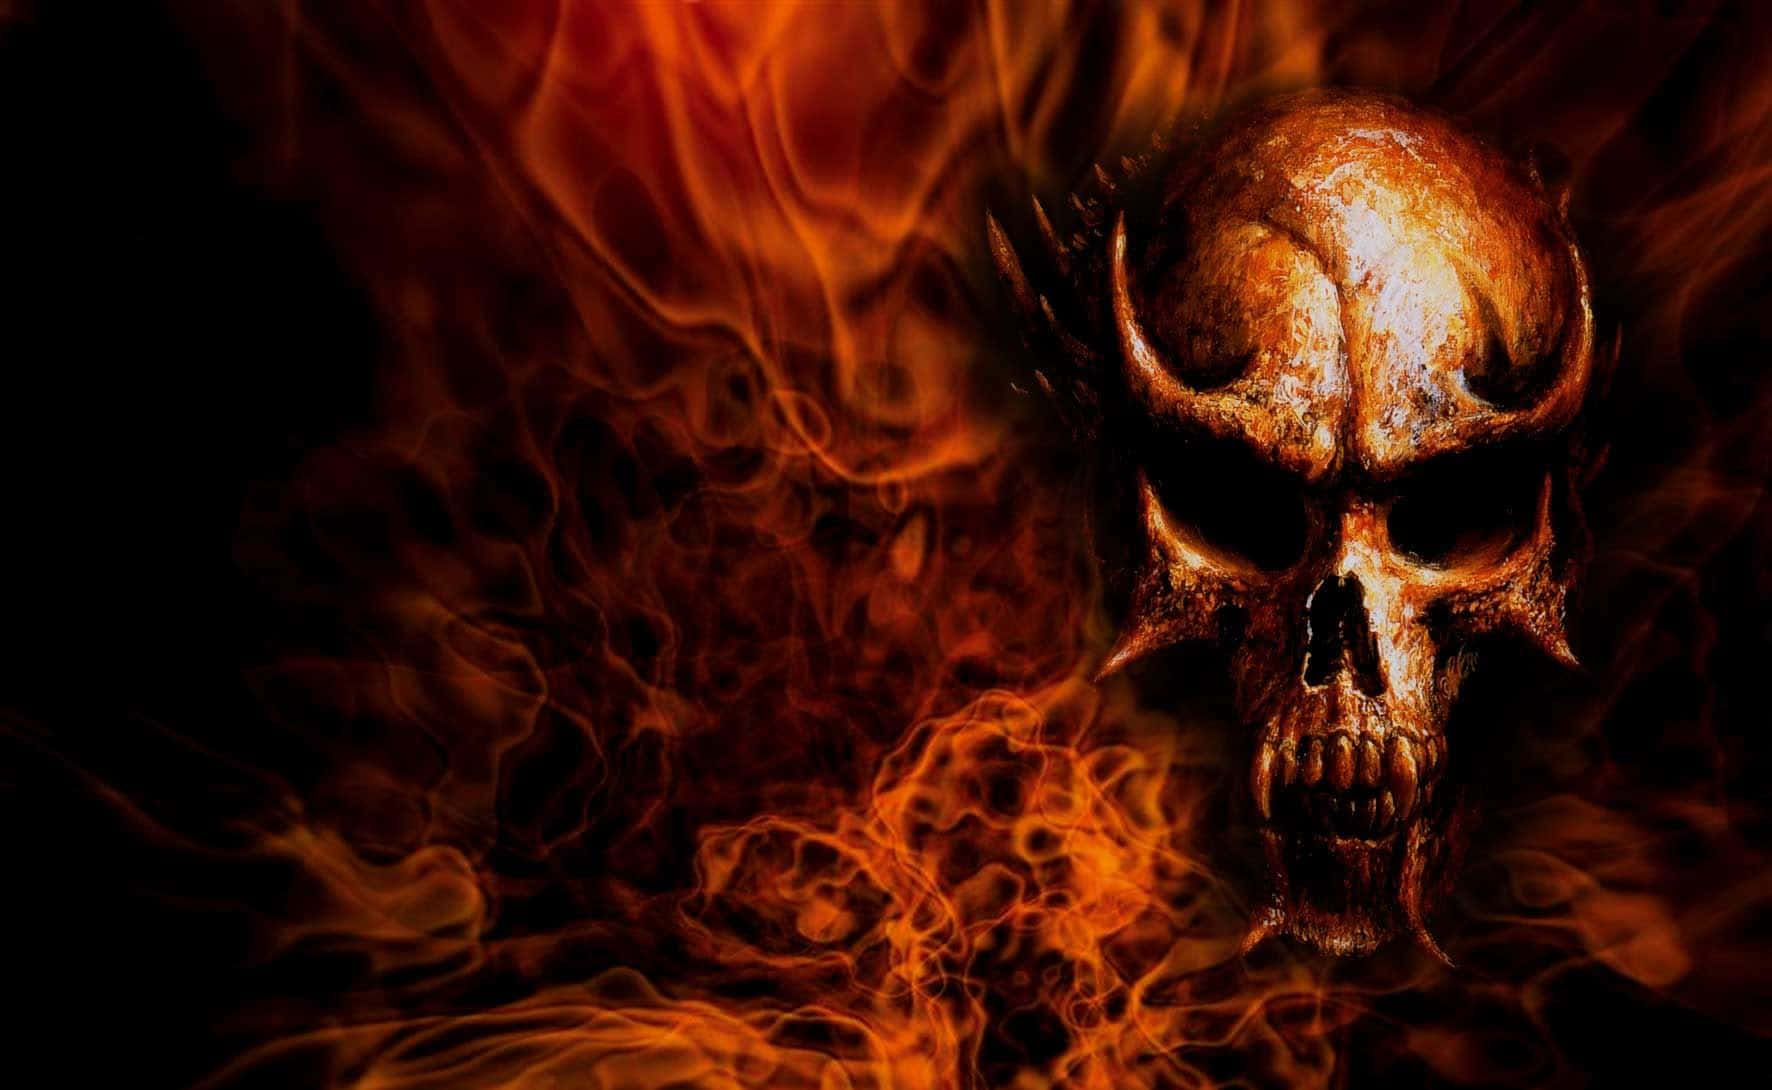 "A red flame skull, a symbol of power and strength" Wallpaper